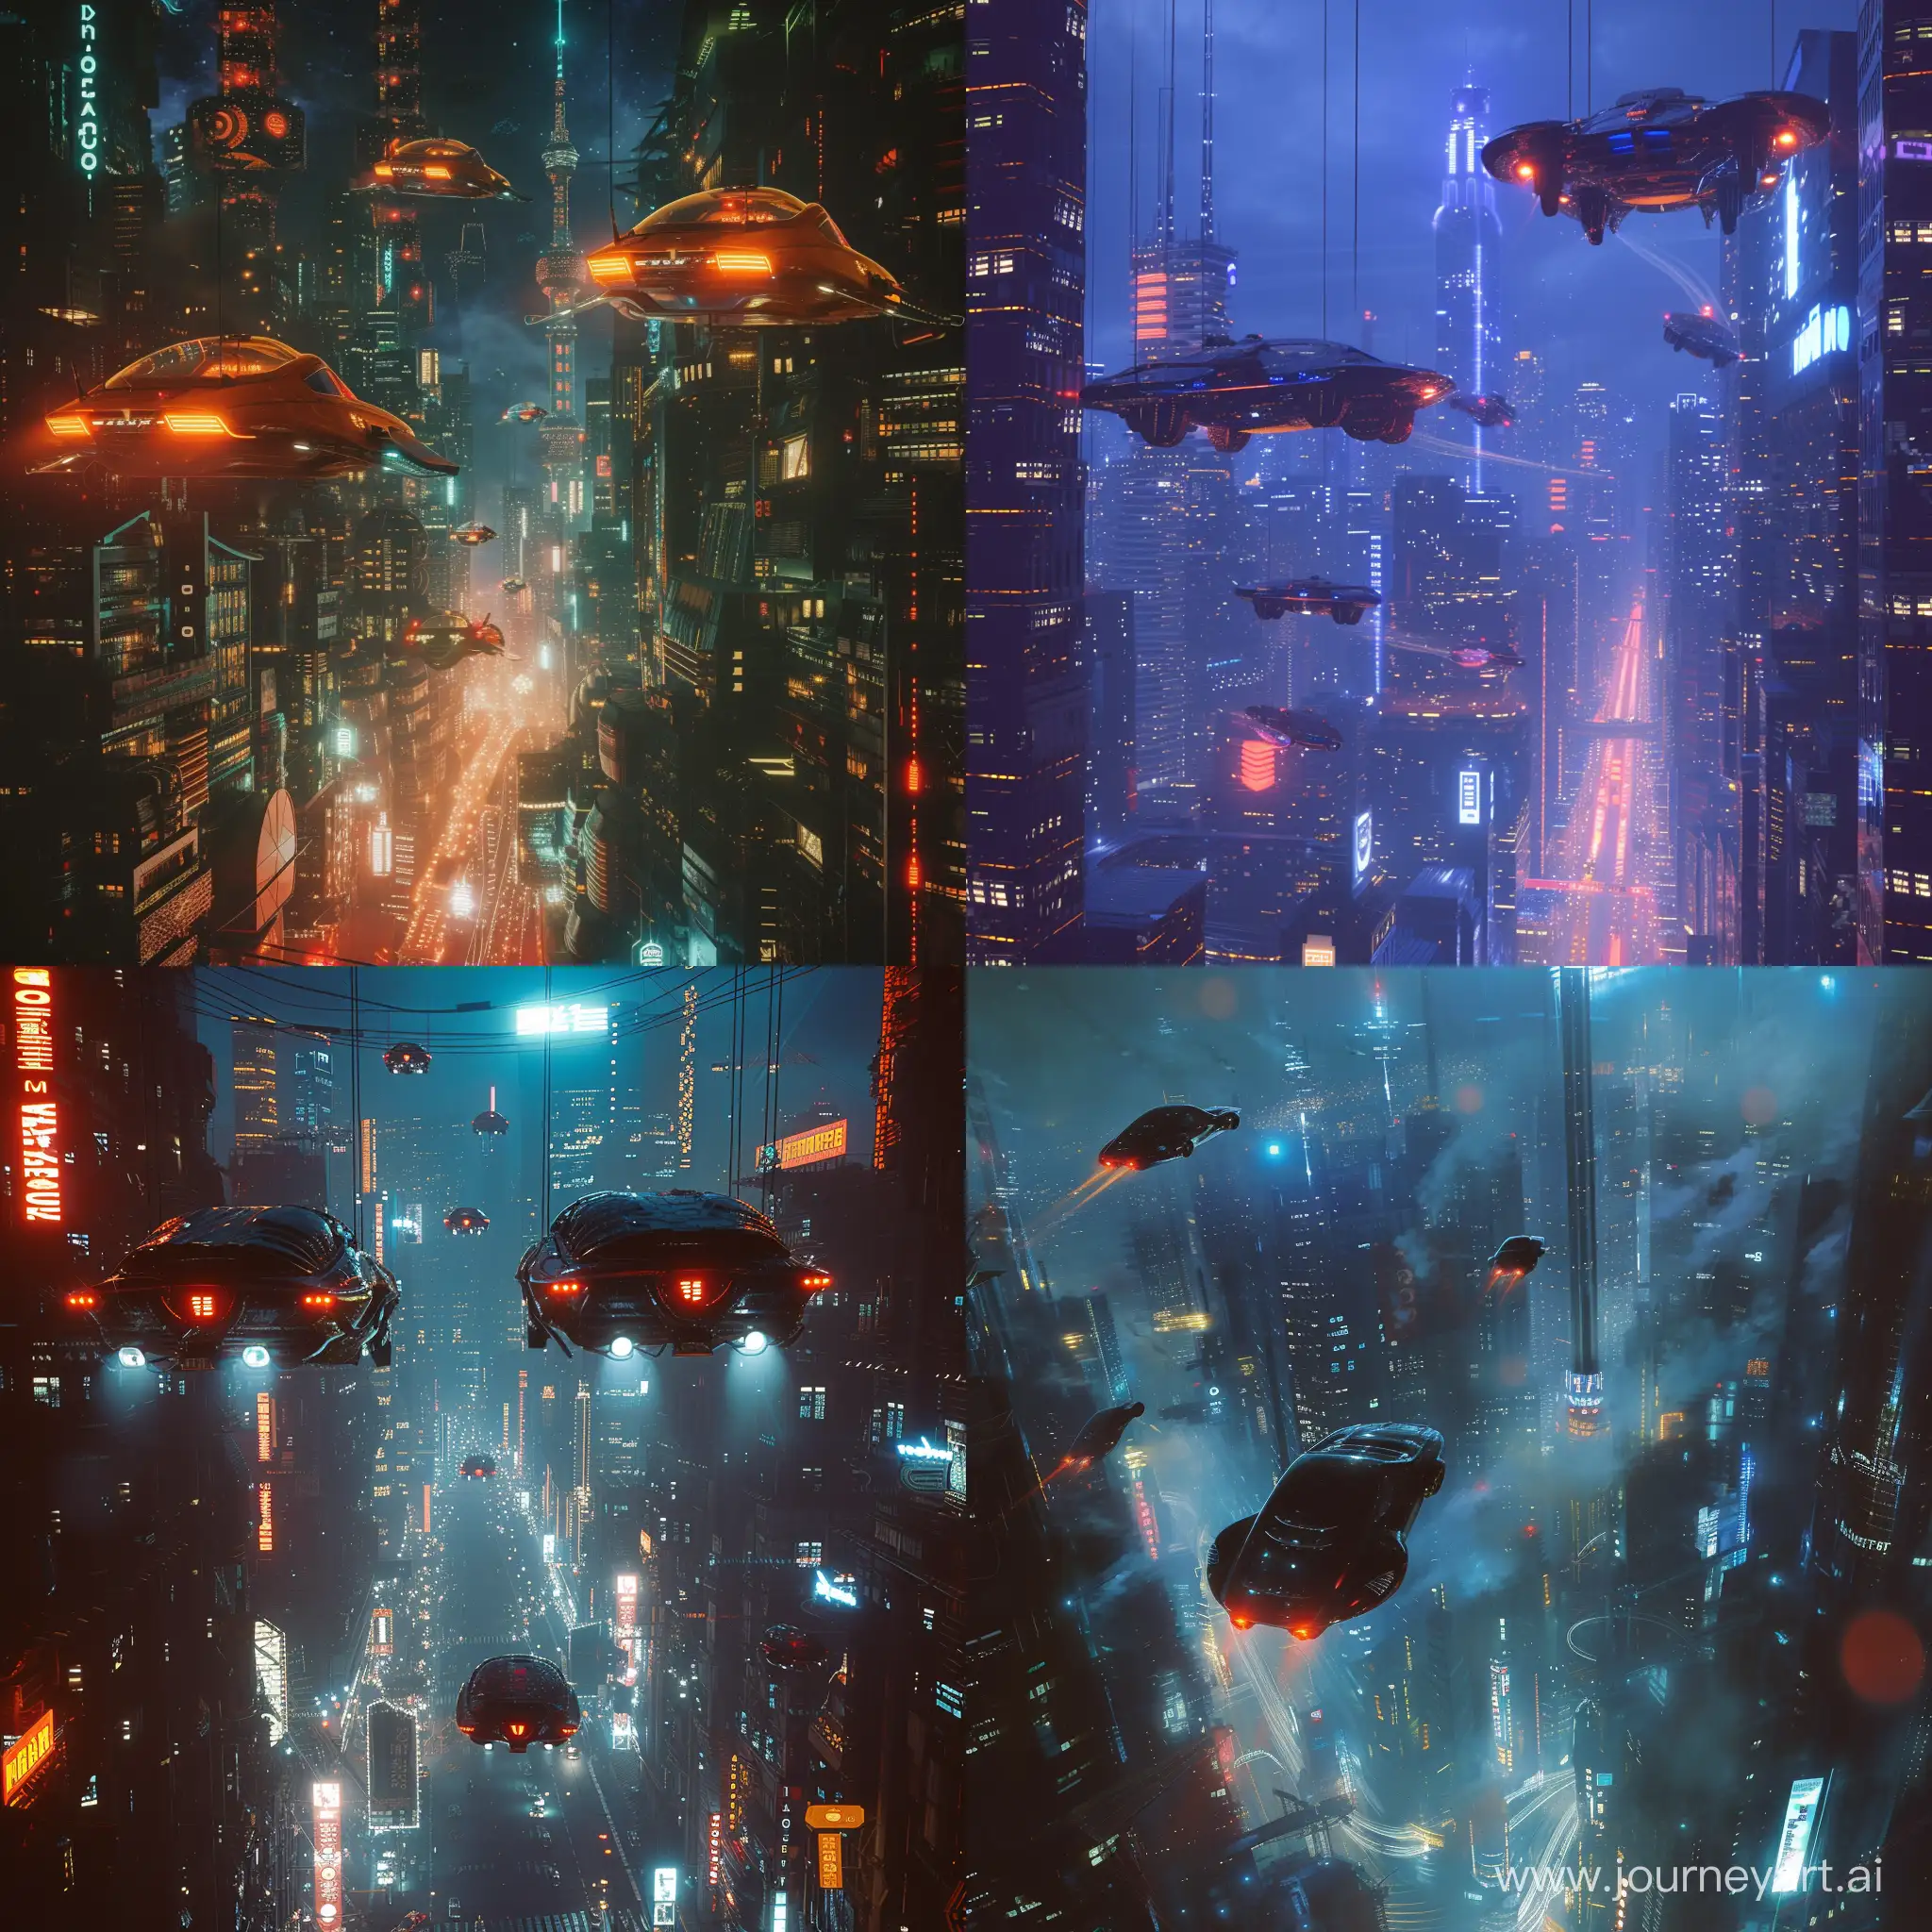 Futuristic-Cyberpunk-Cityscape-with-Hovering-Vehicles